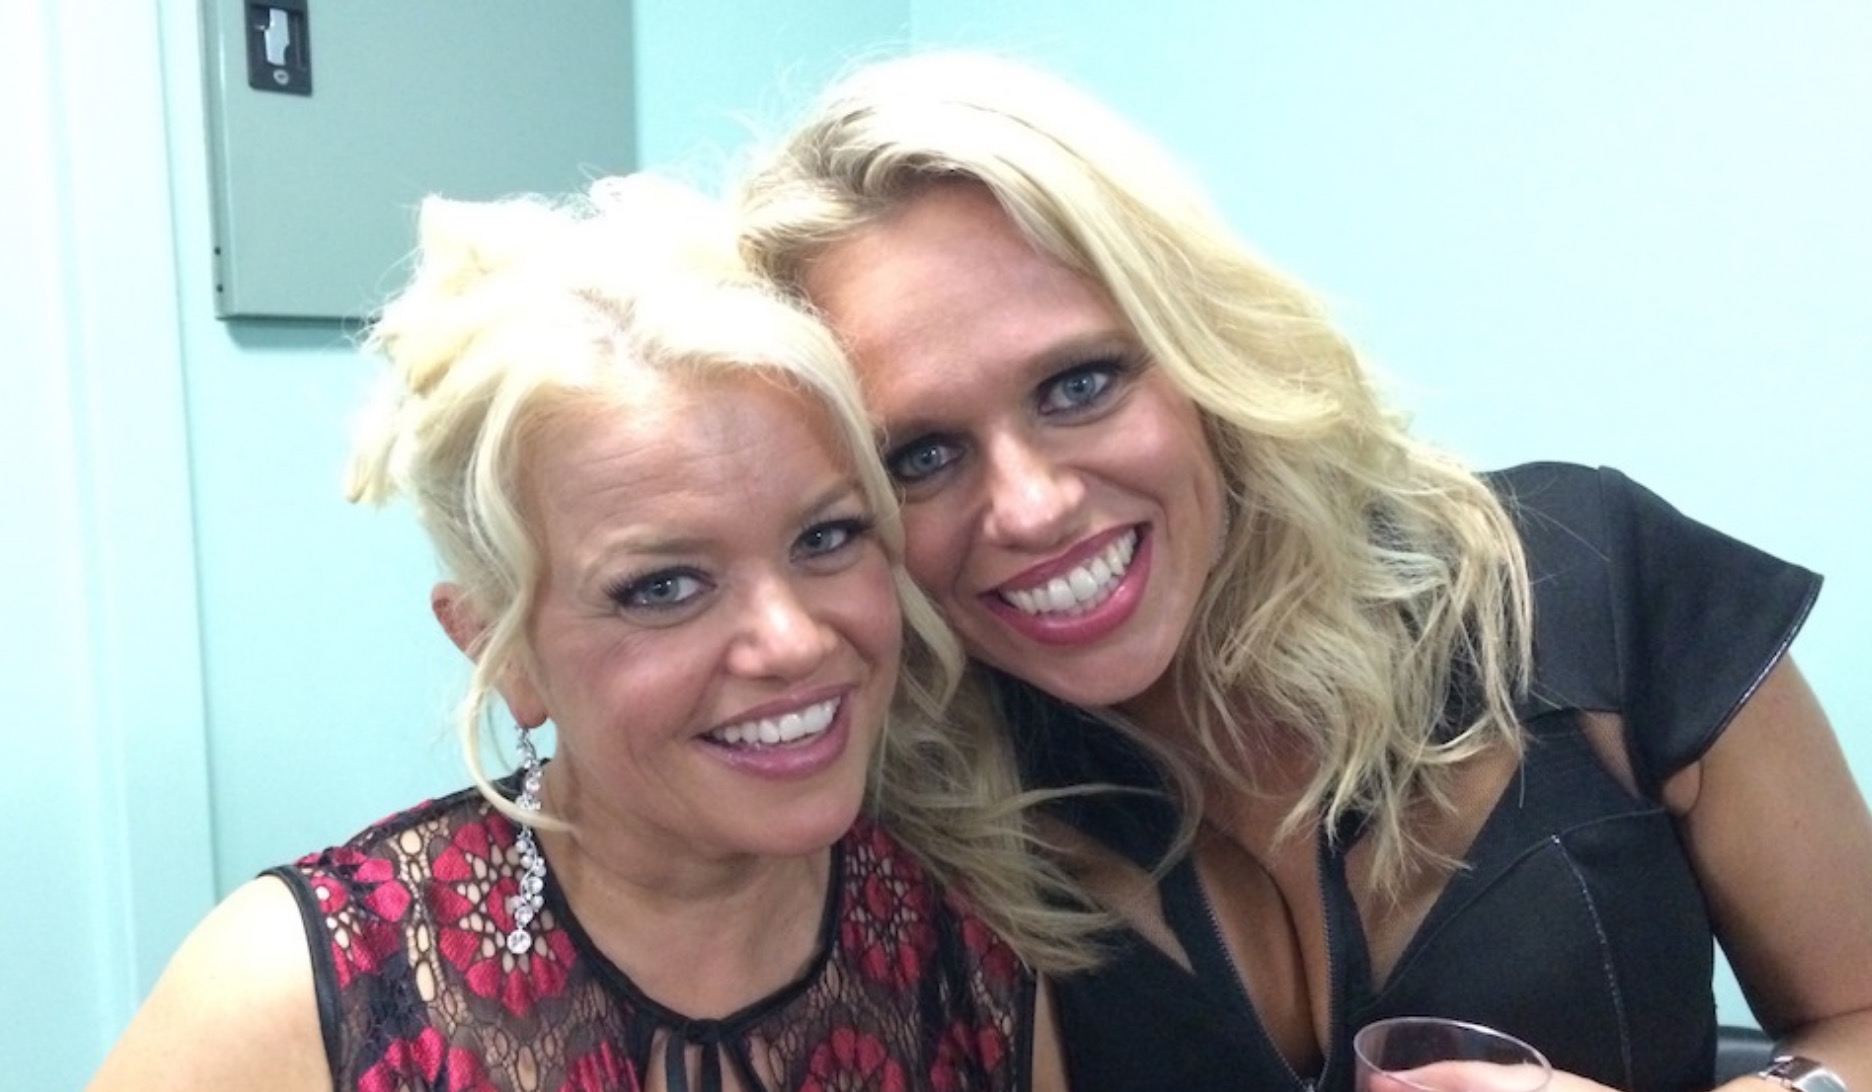   Libby O’Donovan and Beccy Cole  image source - ABCTV 